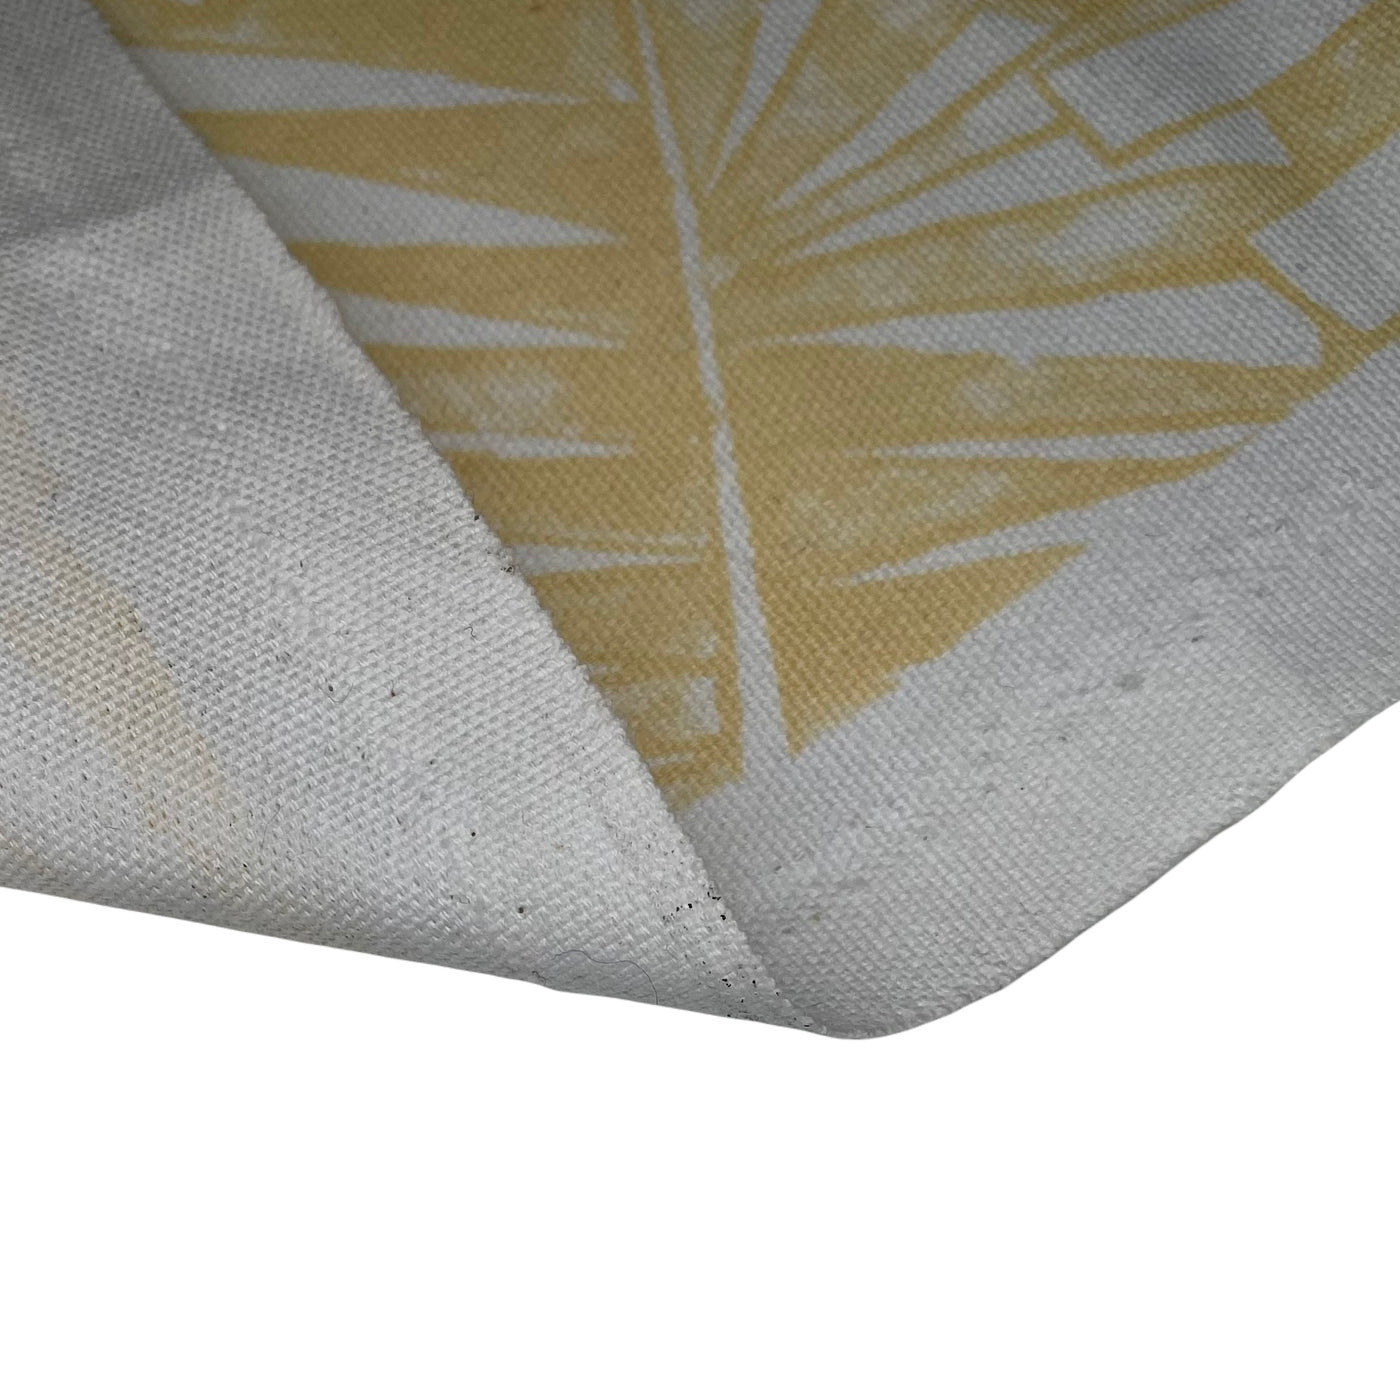 Printed Cotton Canvas Palm Leaves - Yellow/White